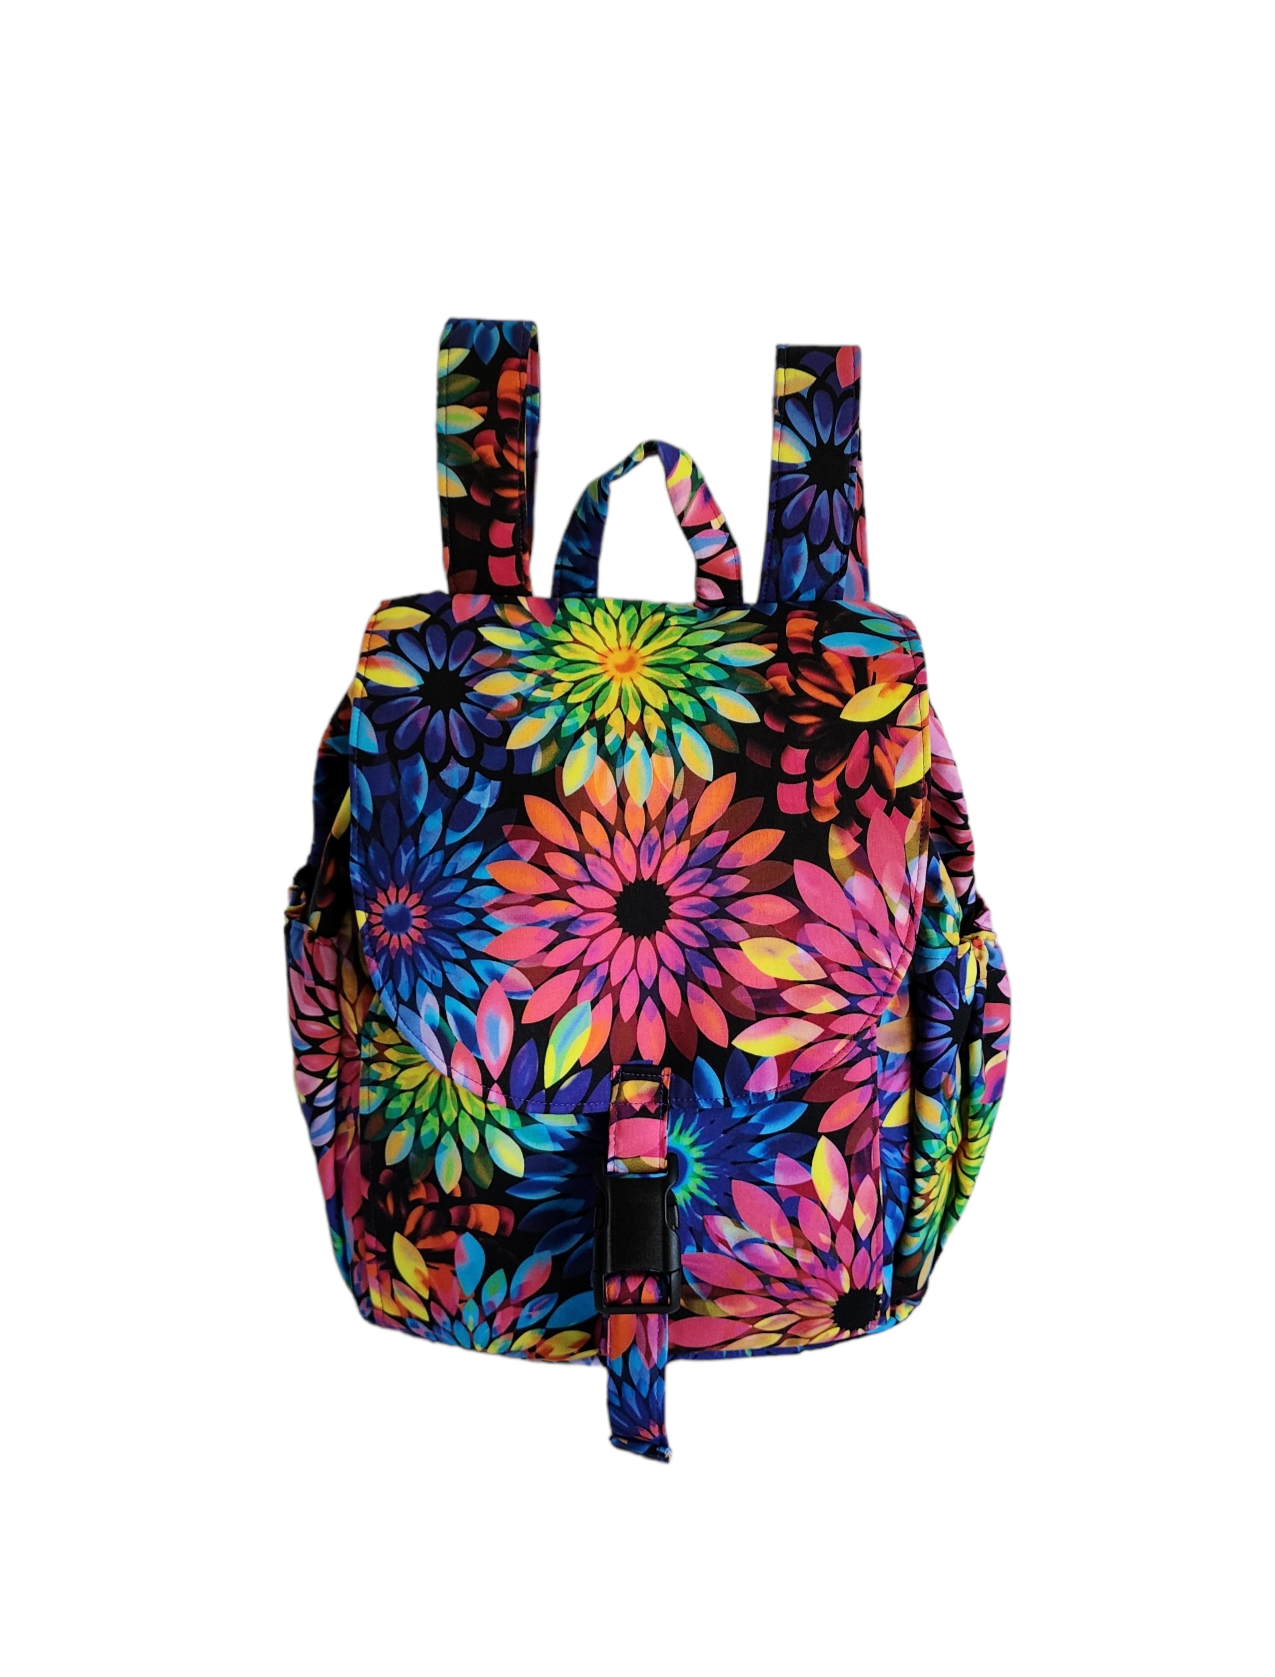 Clothing & Accessories :: Bags & Purses :: Medium backpack Flower power ...